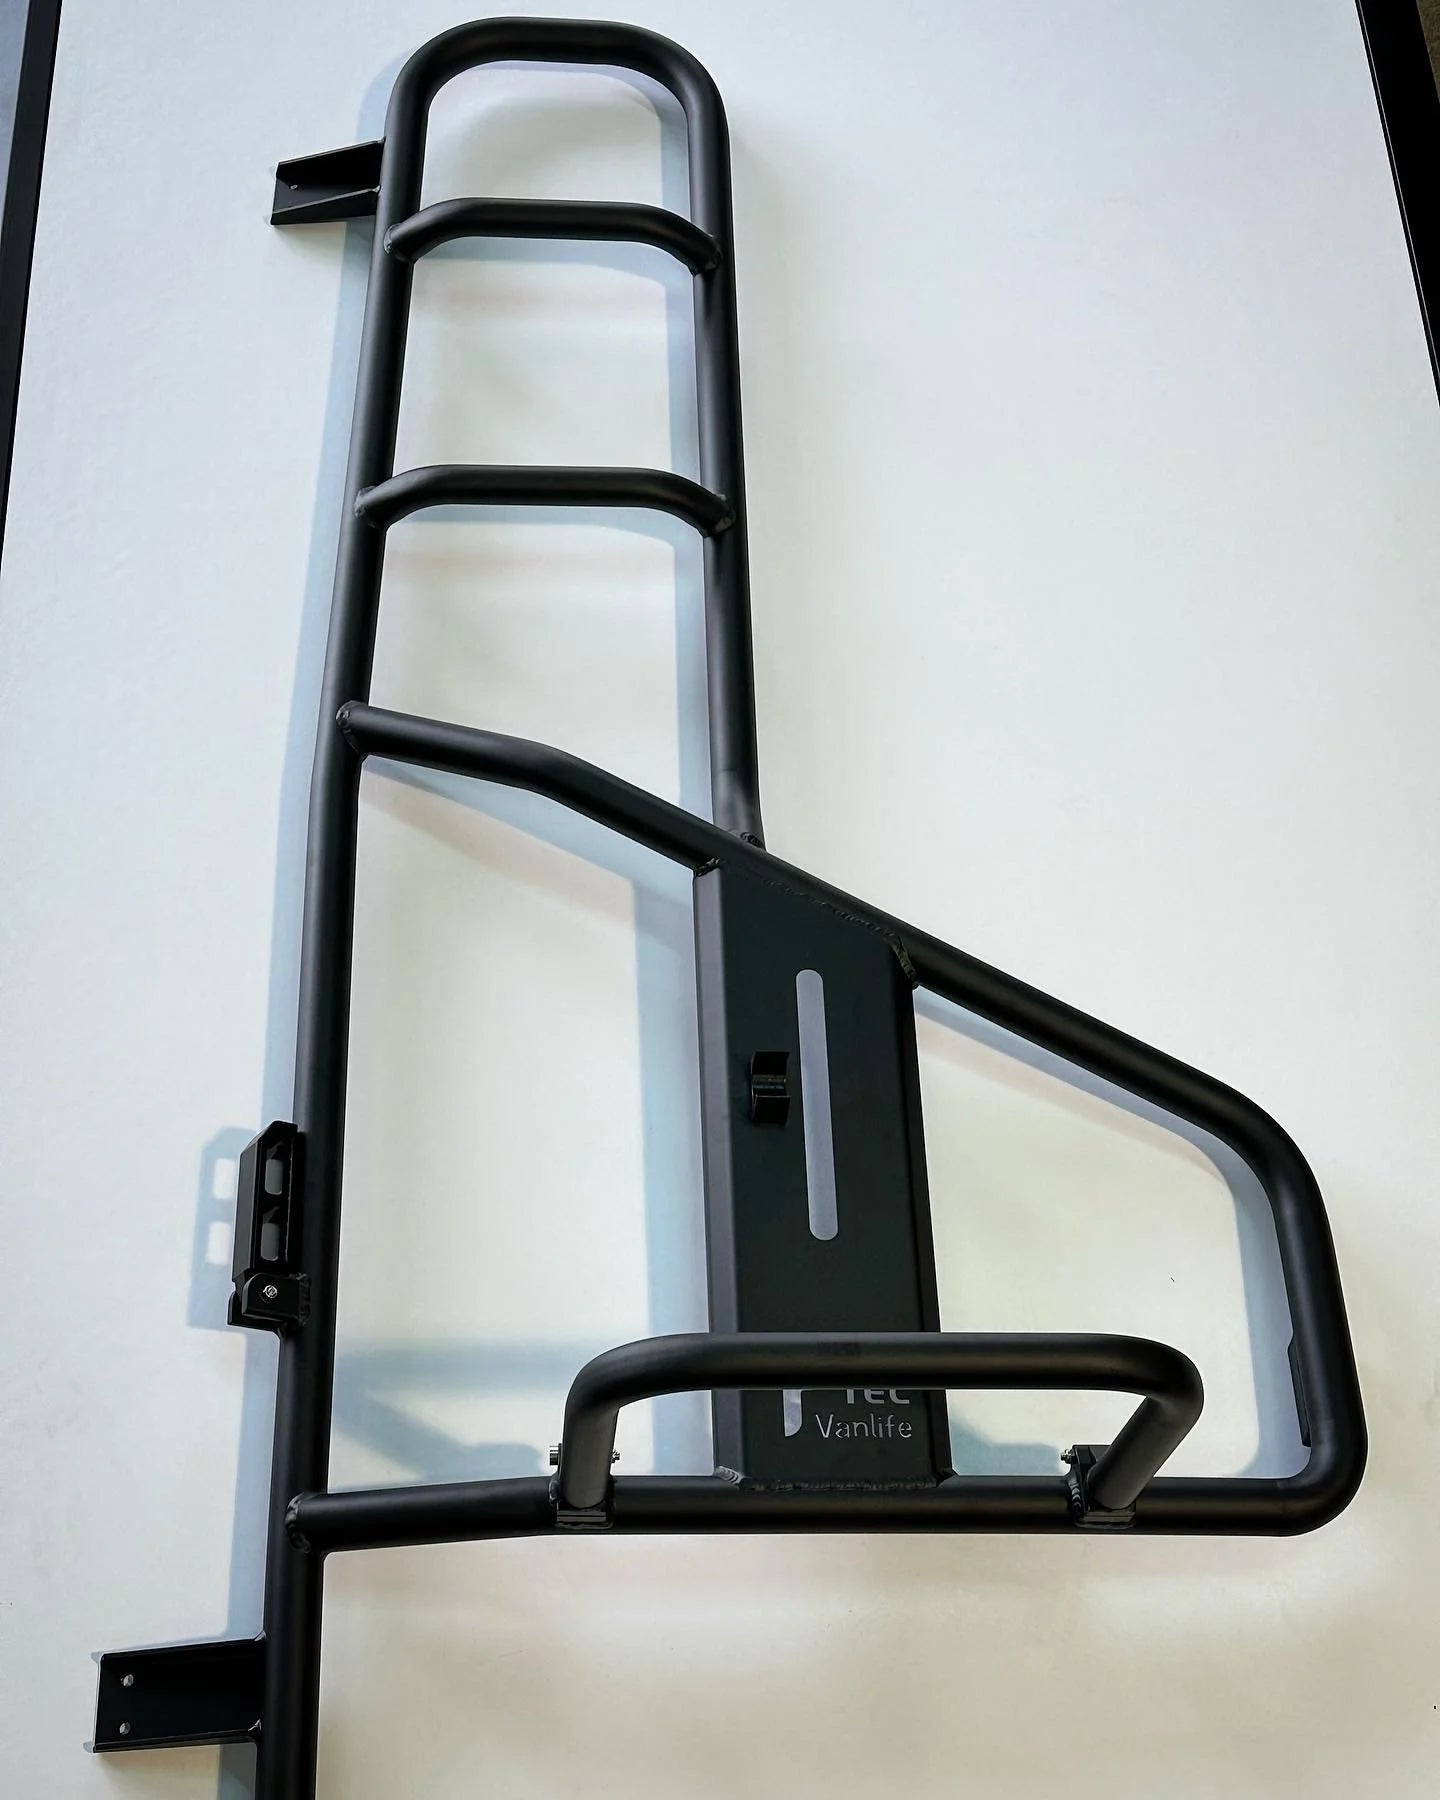 Sprinter Two-in-one ladder and tire carrier